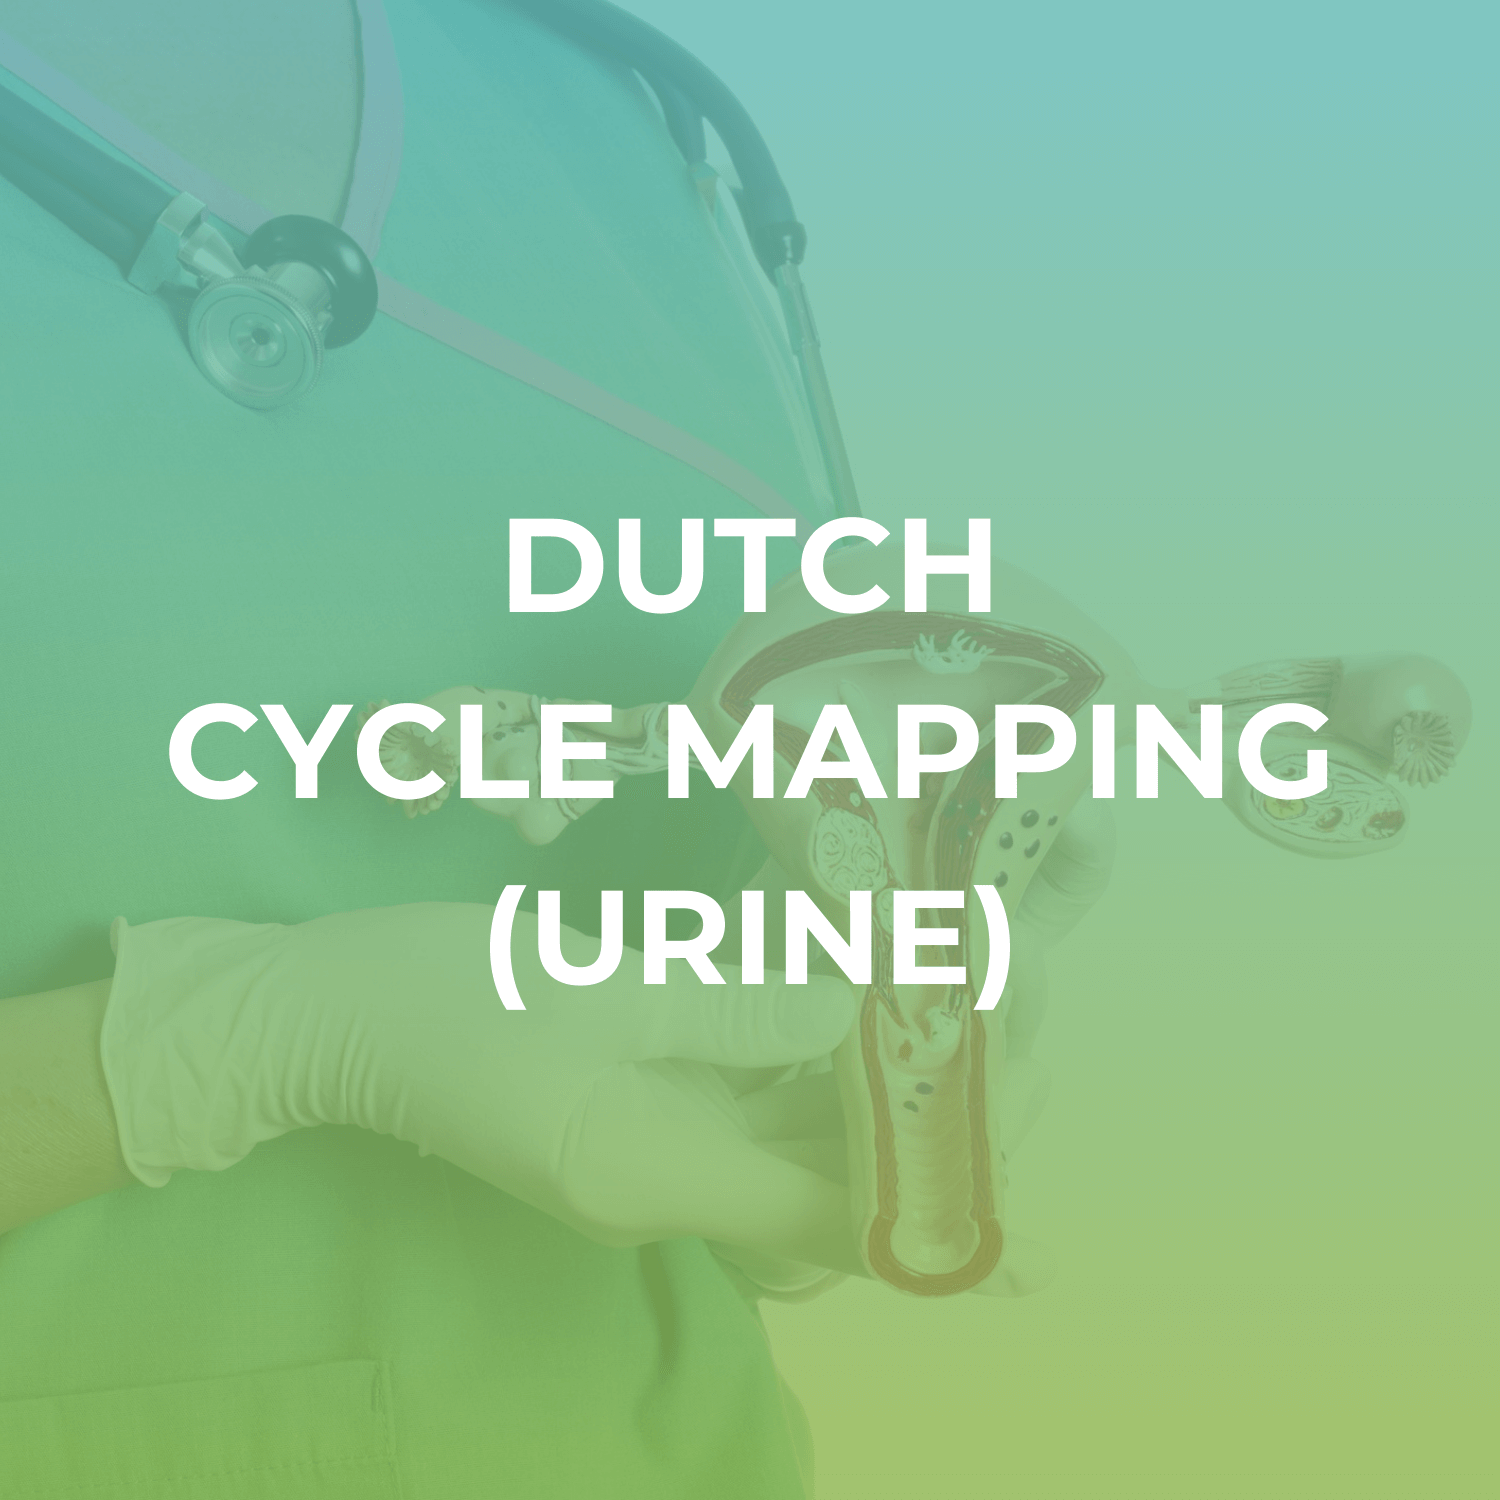 DUTCH Cycle Mapping